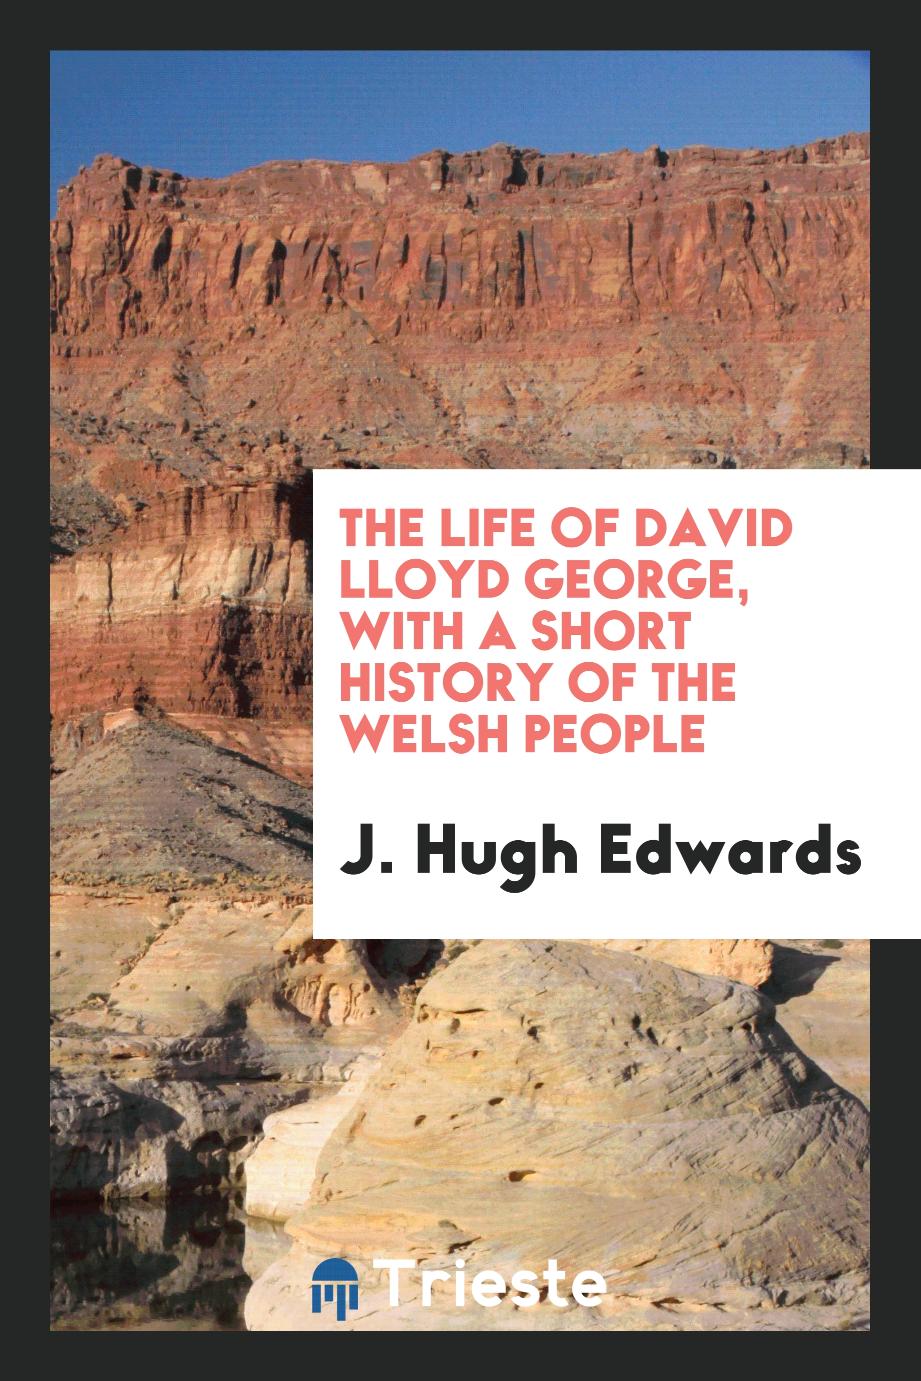 The life of David Lloyd George, with a short history of the Welsh people